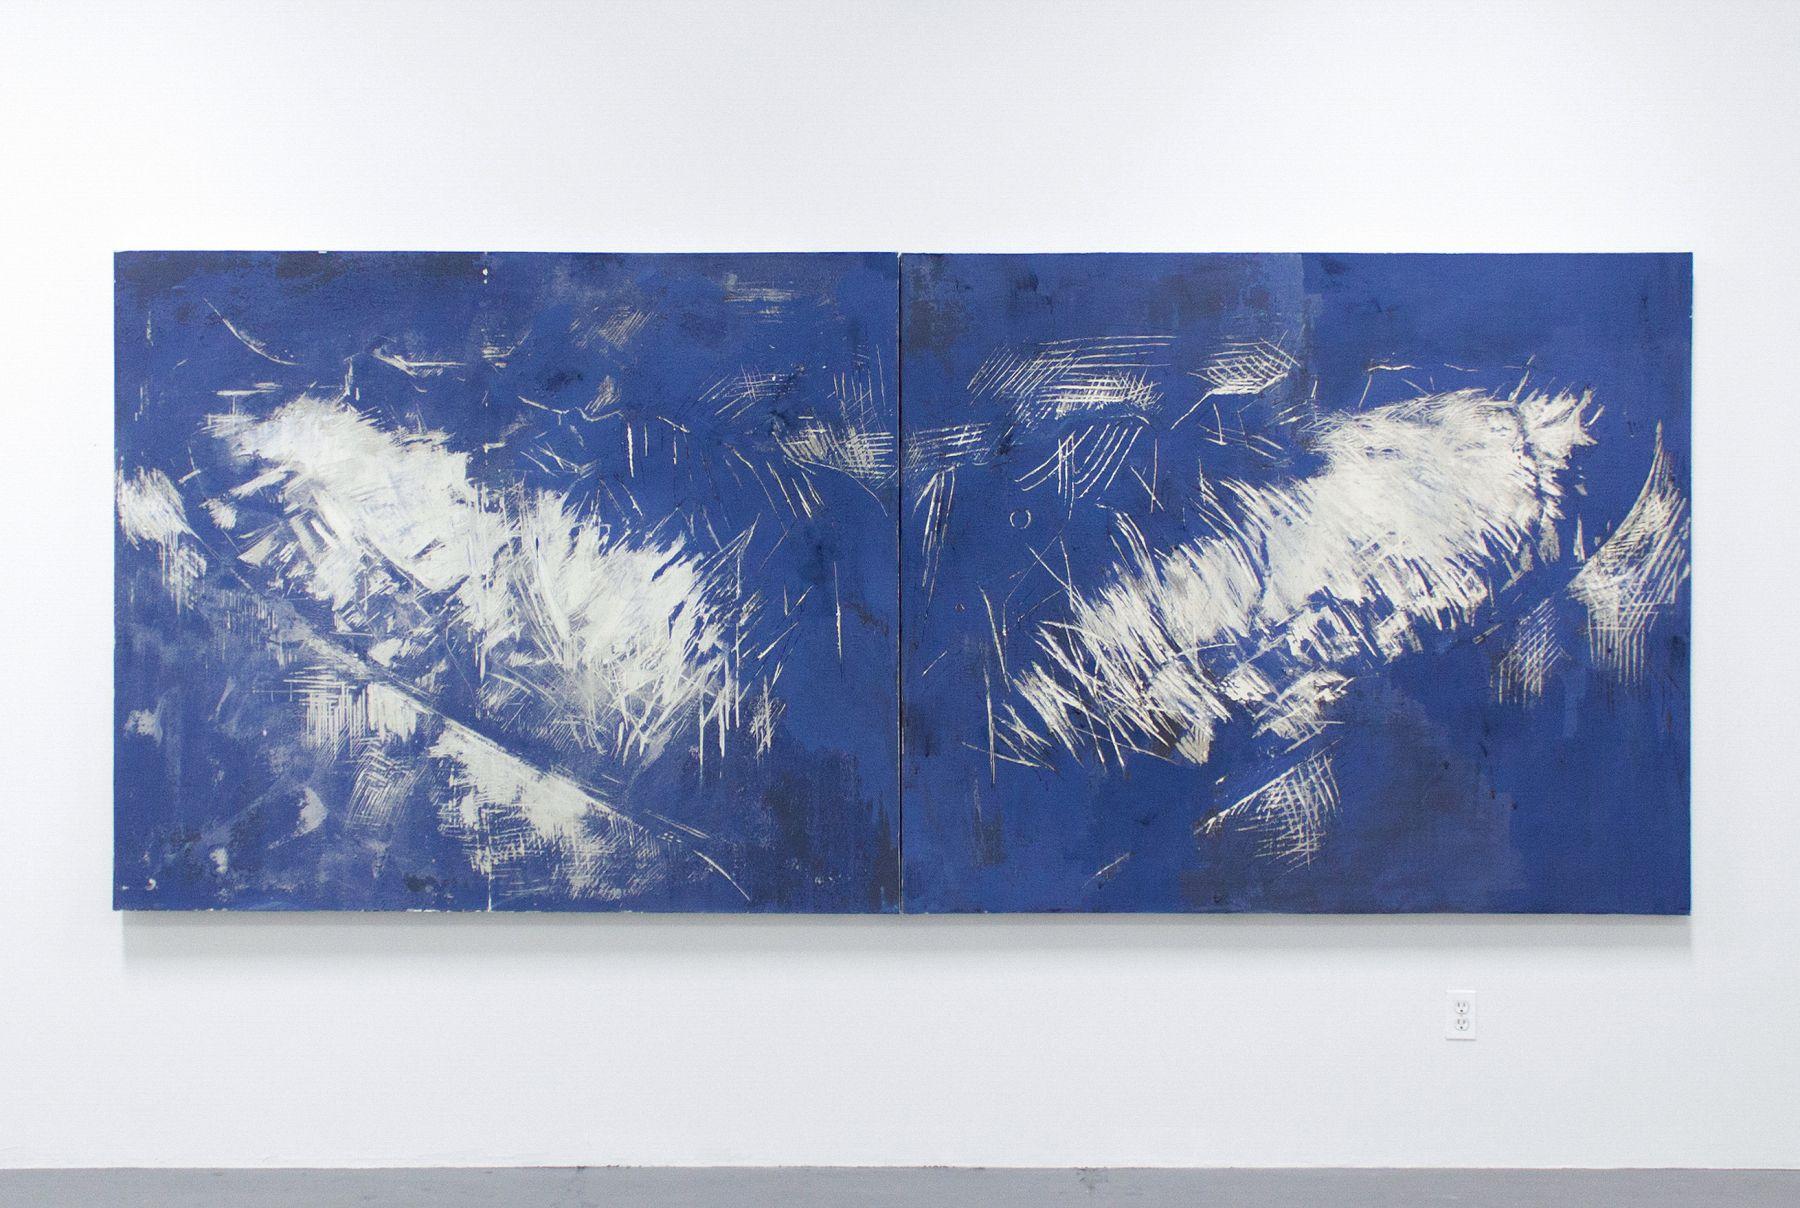 TWO PANELS. Two Panels: each 60 x 72 in. Overall dimensions: 60 x 144 in. (152.40 x 365.76 cm) - the depth is 2.75 inches.


The paintings shown the exhibition ANGELS at Silas von Morisse gallery, portrays a species that was present on Earth 30